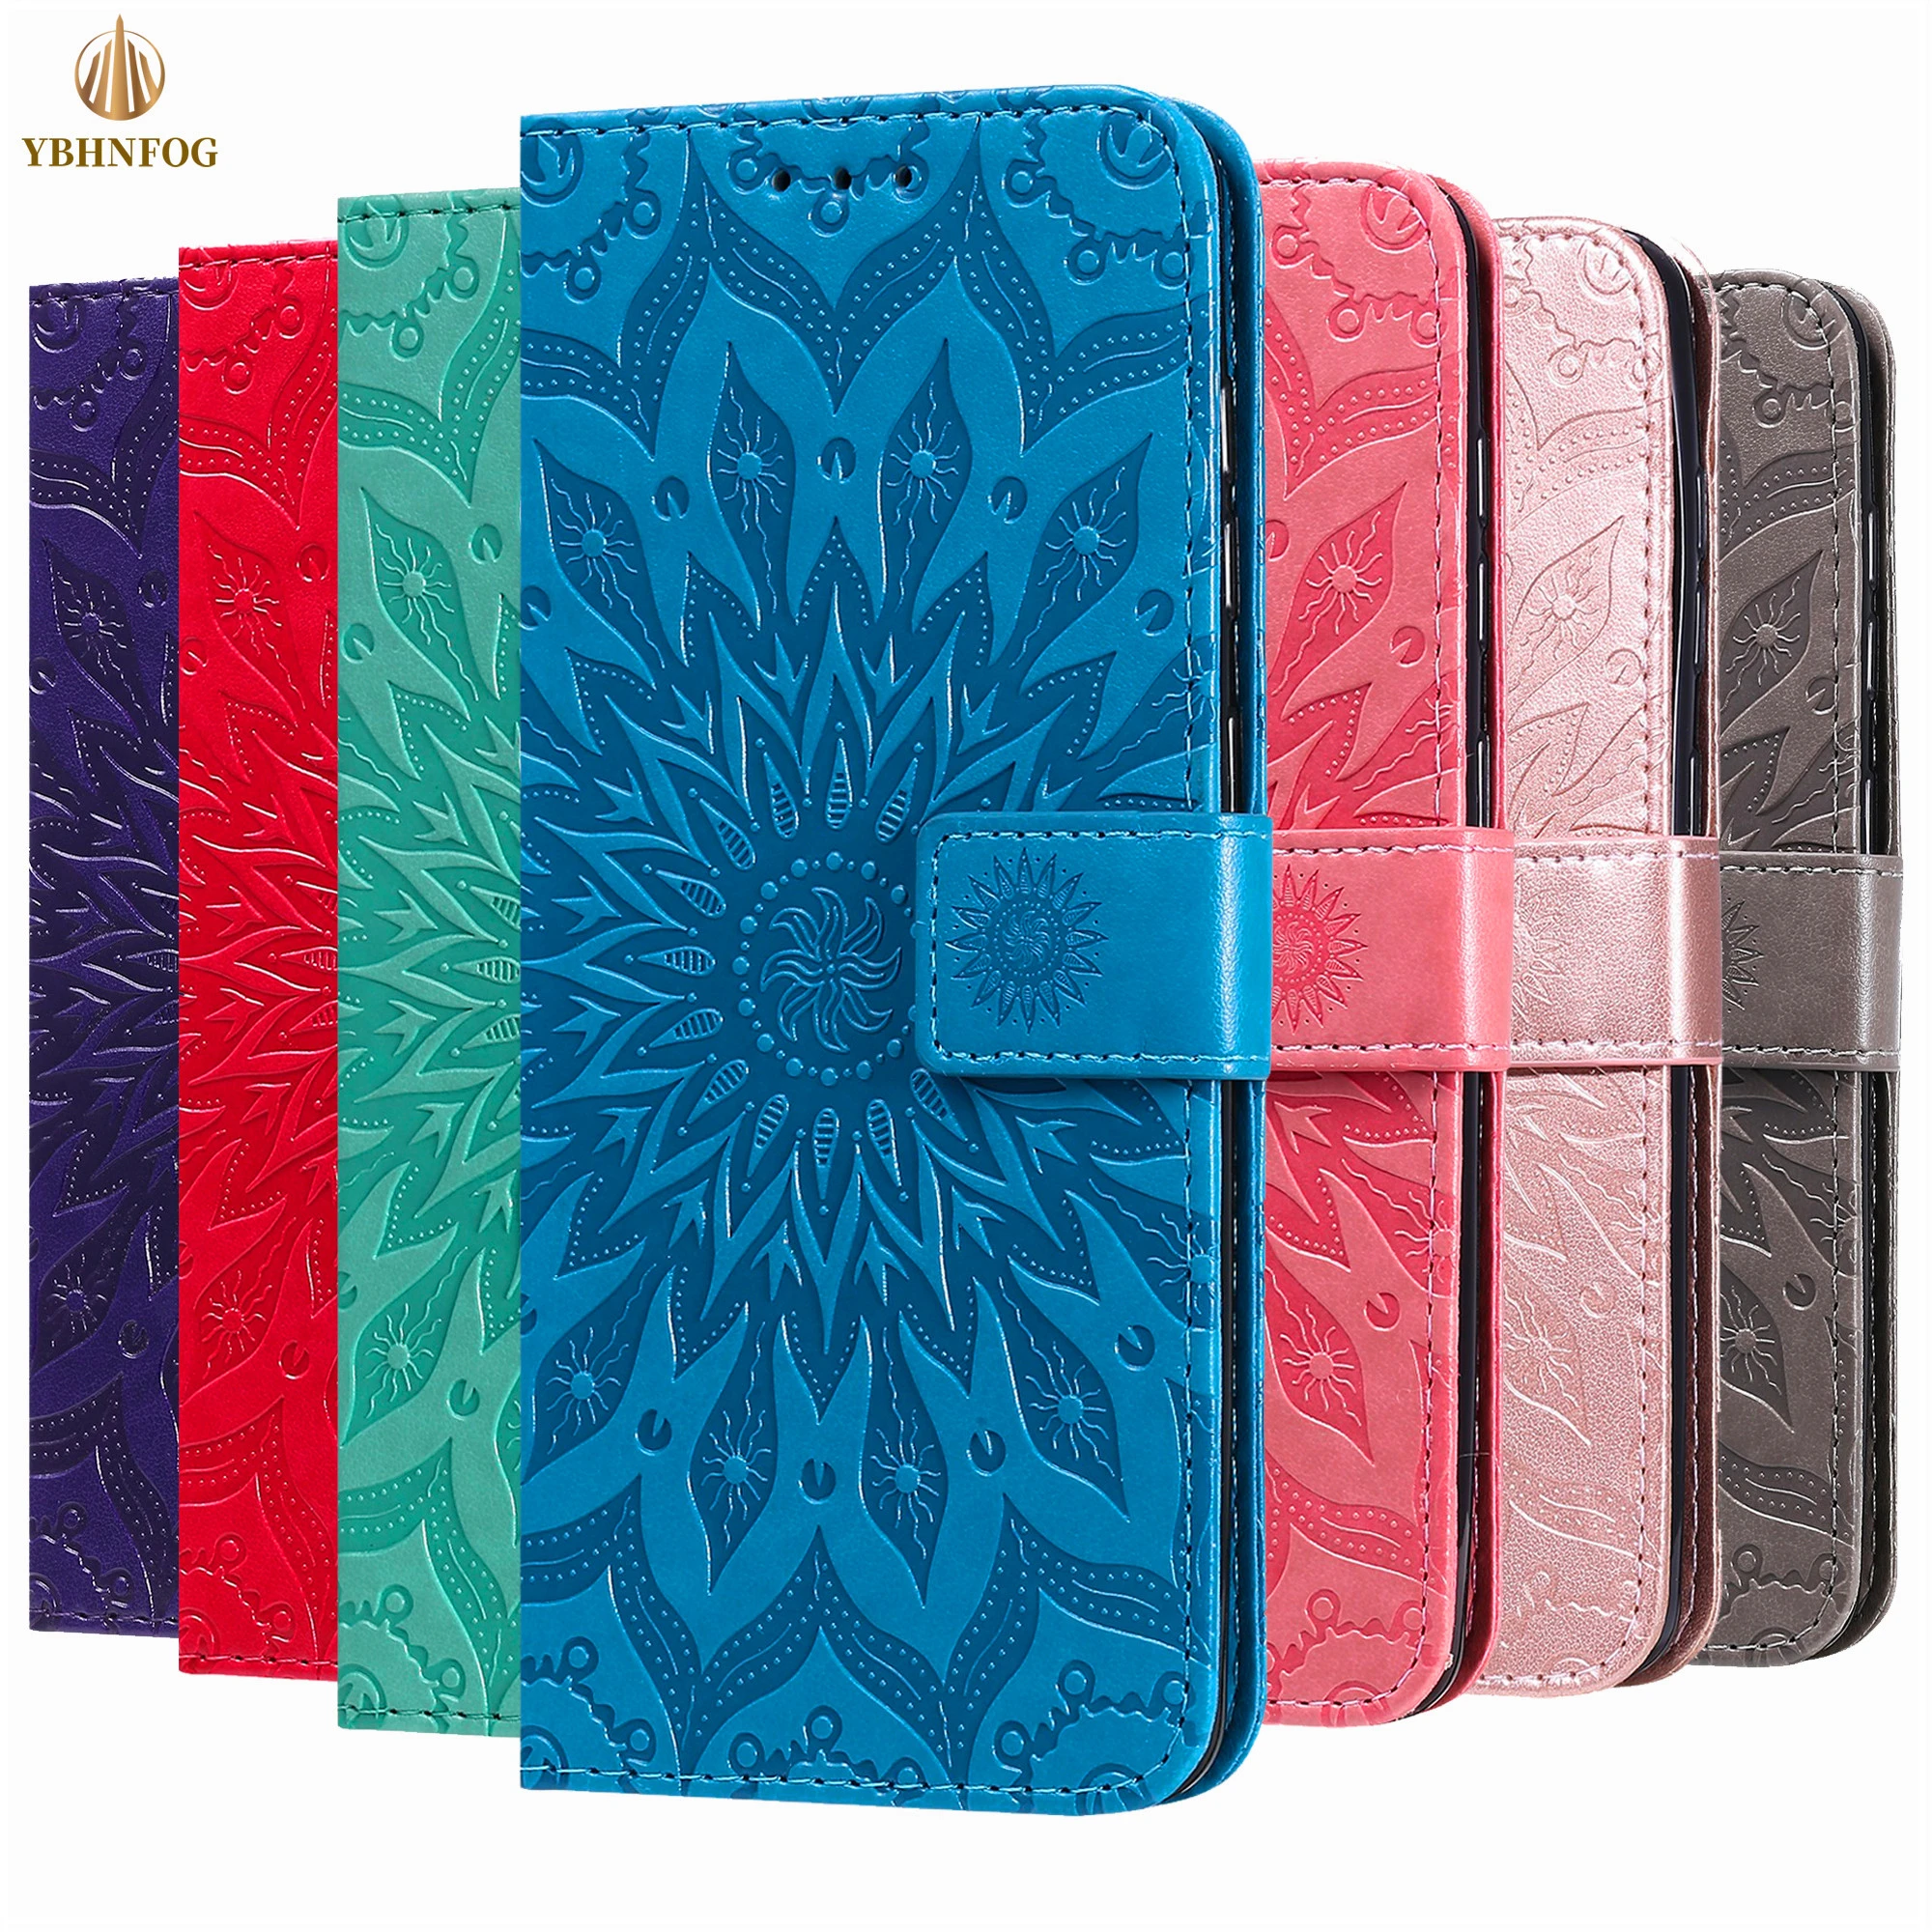 3D Embossed Leather Wallet Case For iPhone12 Mini 11 Pro Max X XS XR 6 6S 7 8 Plus 5 5S SE 2020 Flip Cover Card Slots Stand Bag